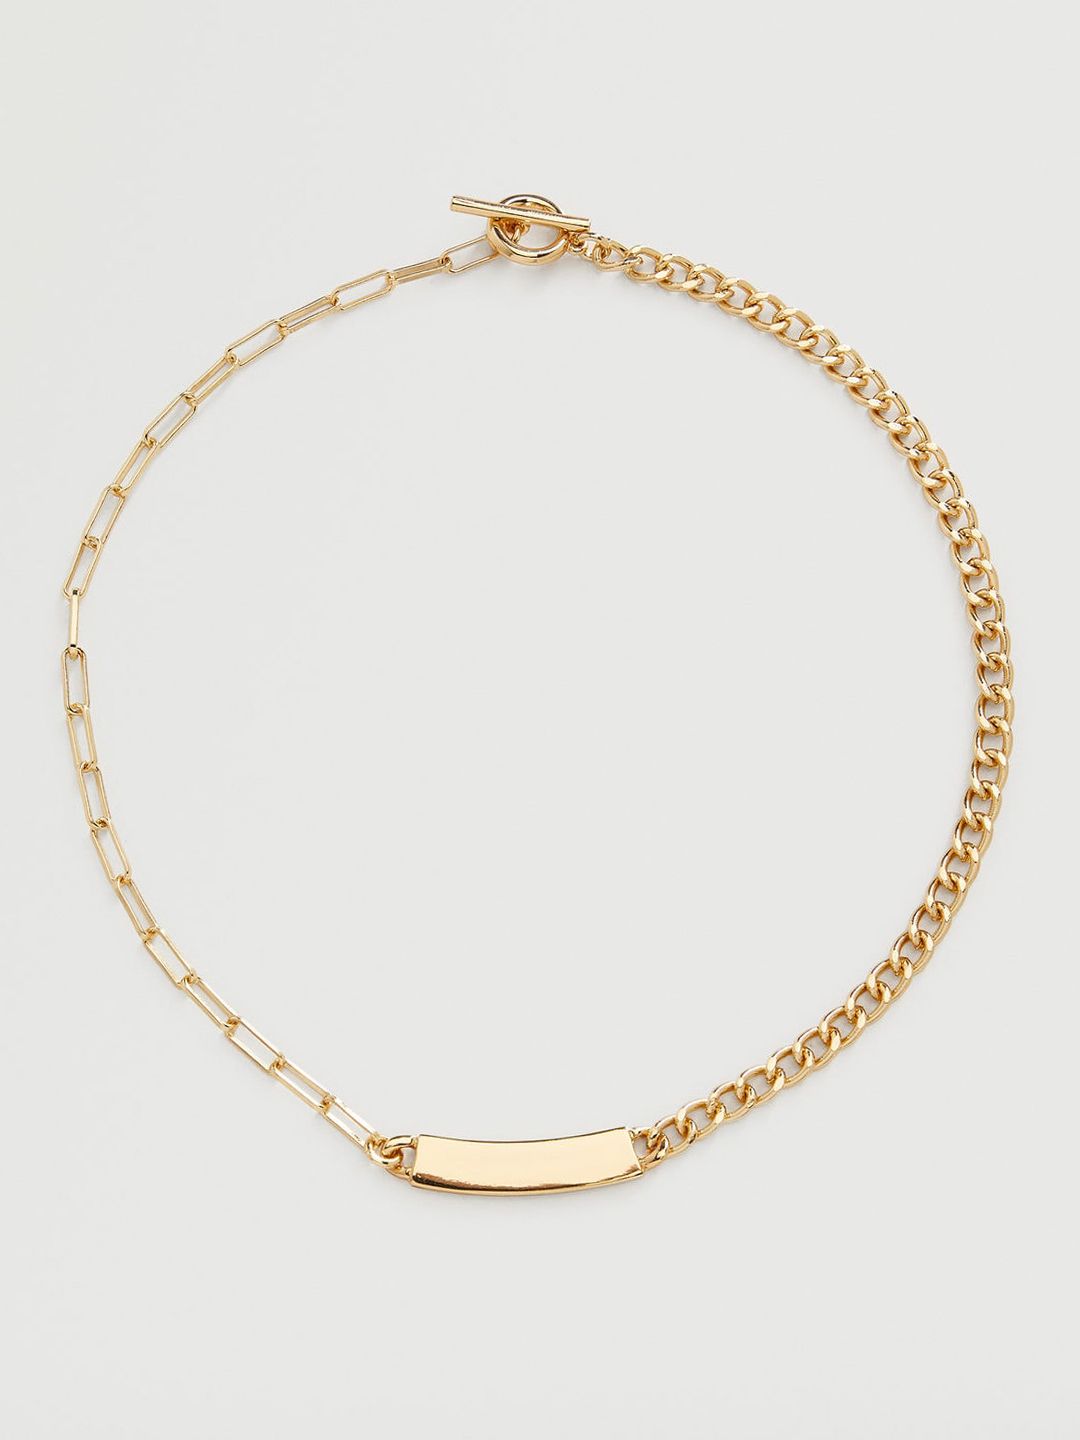 MANGO Women Gold-Toned Necklace Price in India